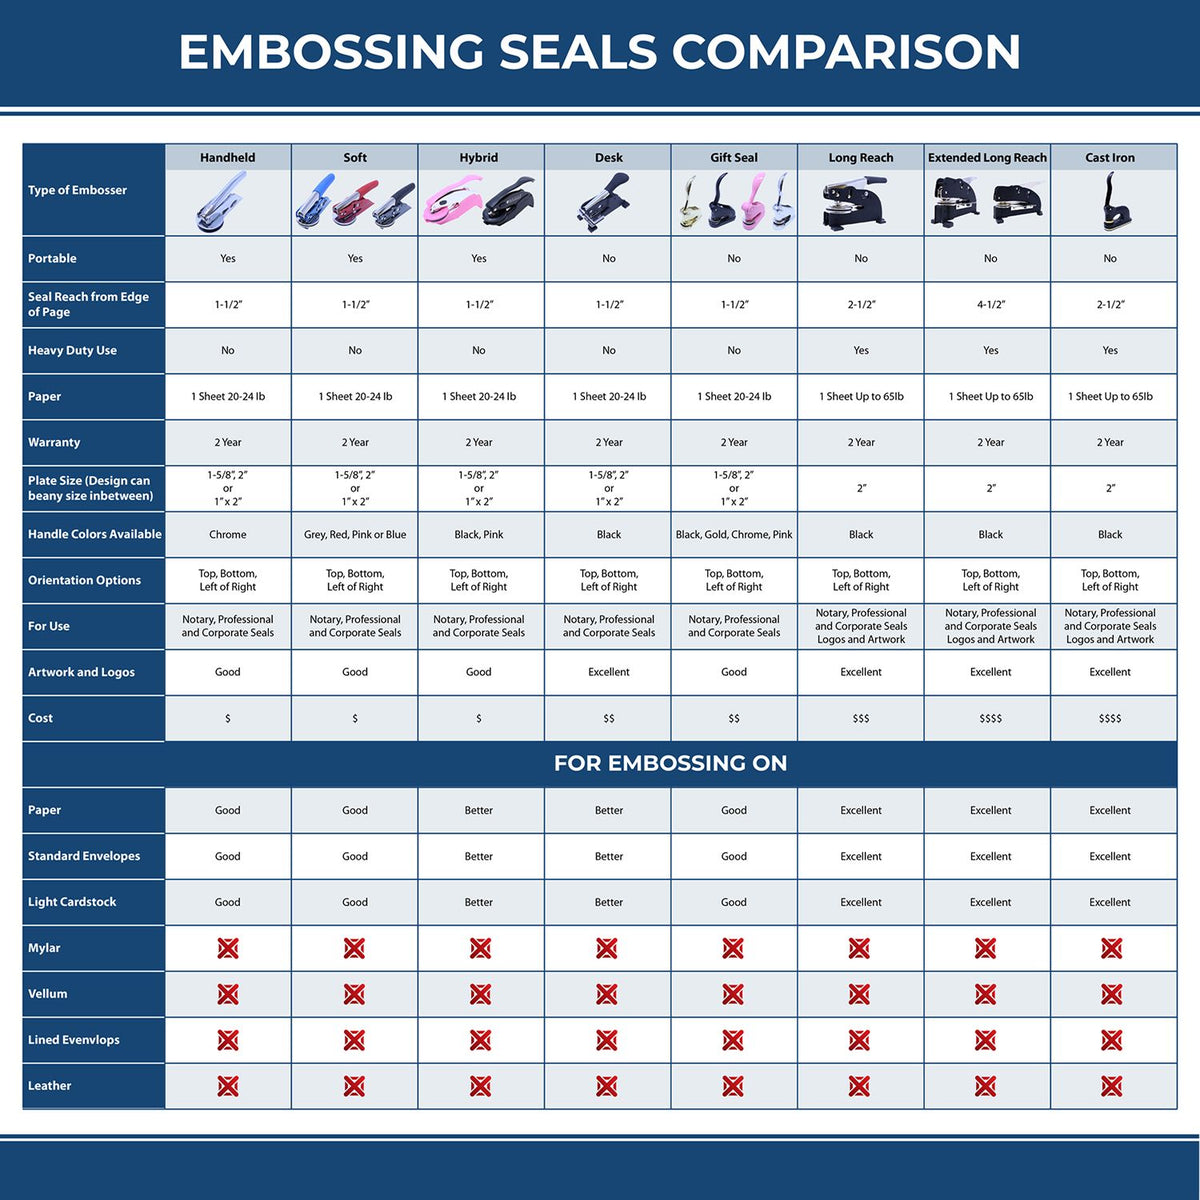 A comparison chart for the different types of mount models available for the Handheld South Dakota Professional Geologist Embosser